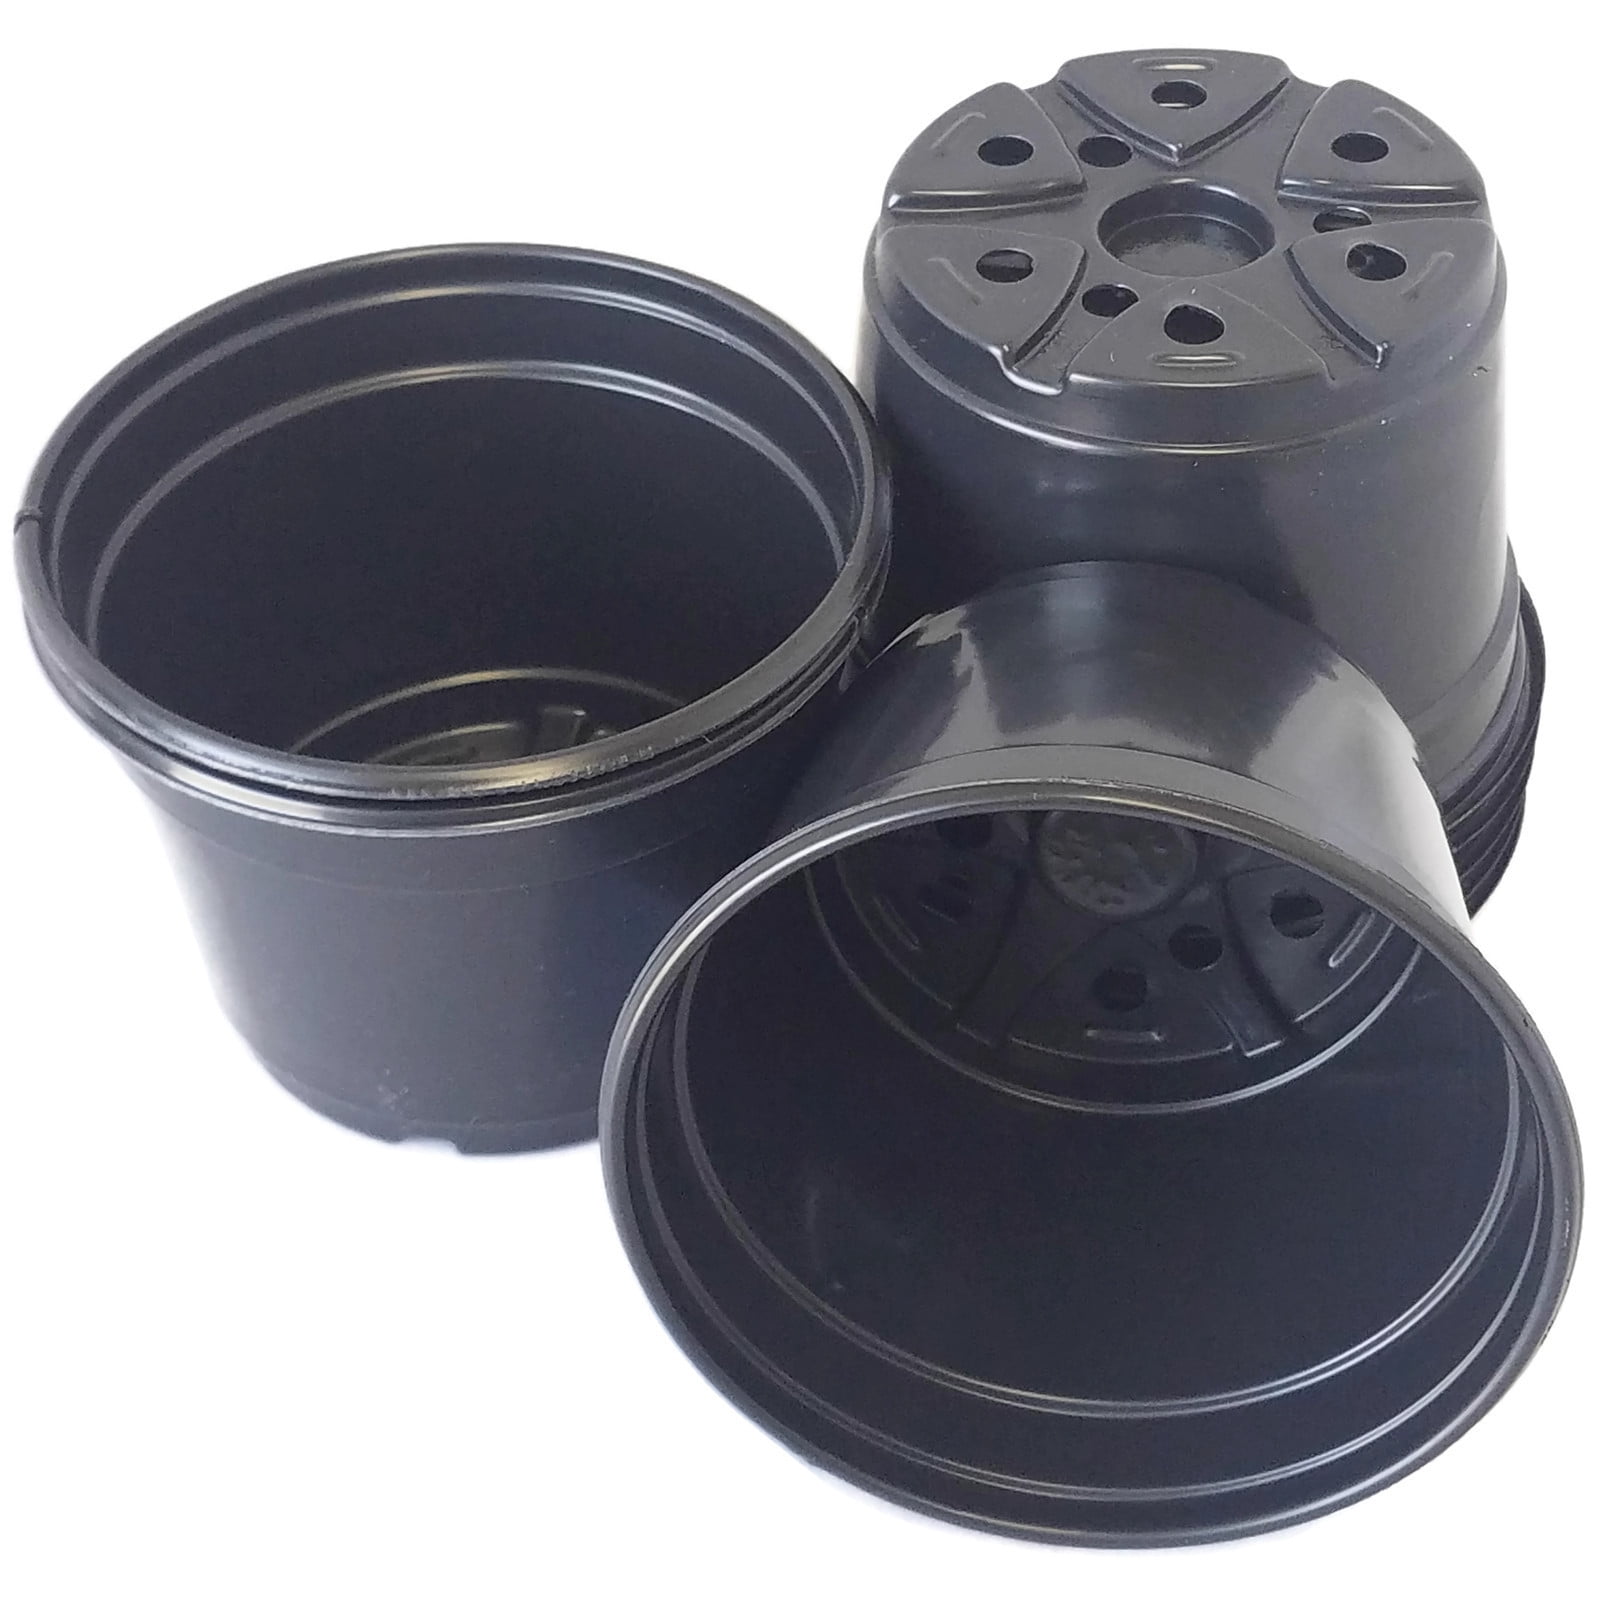 20 NEW 6 Inch Standard Plastic Nursery Pots ~ 6 Inch Round and 5.6 Inch Deep 